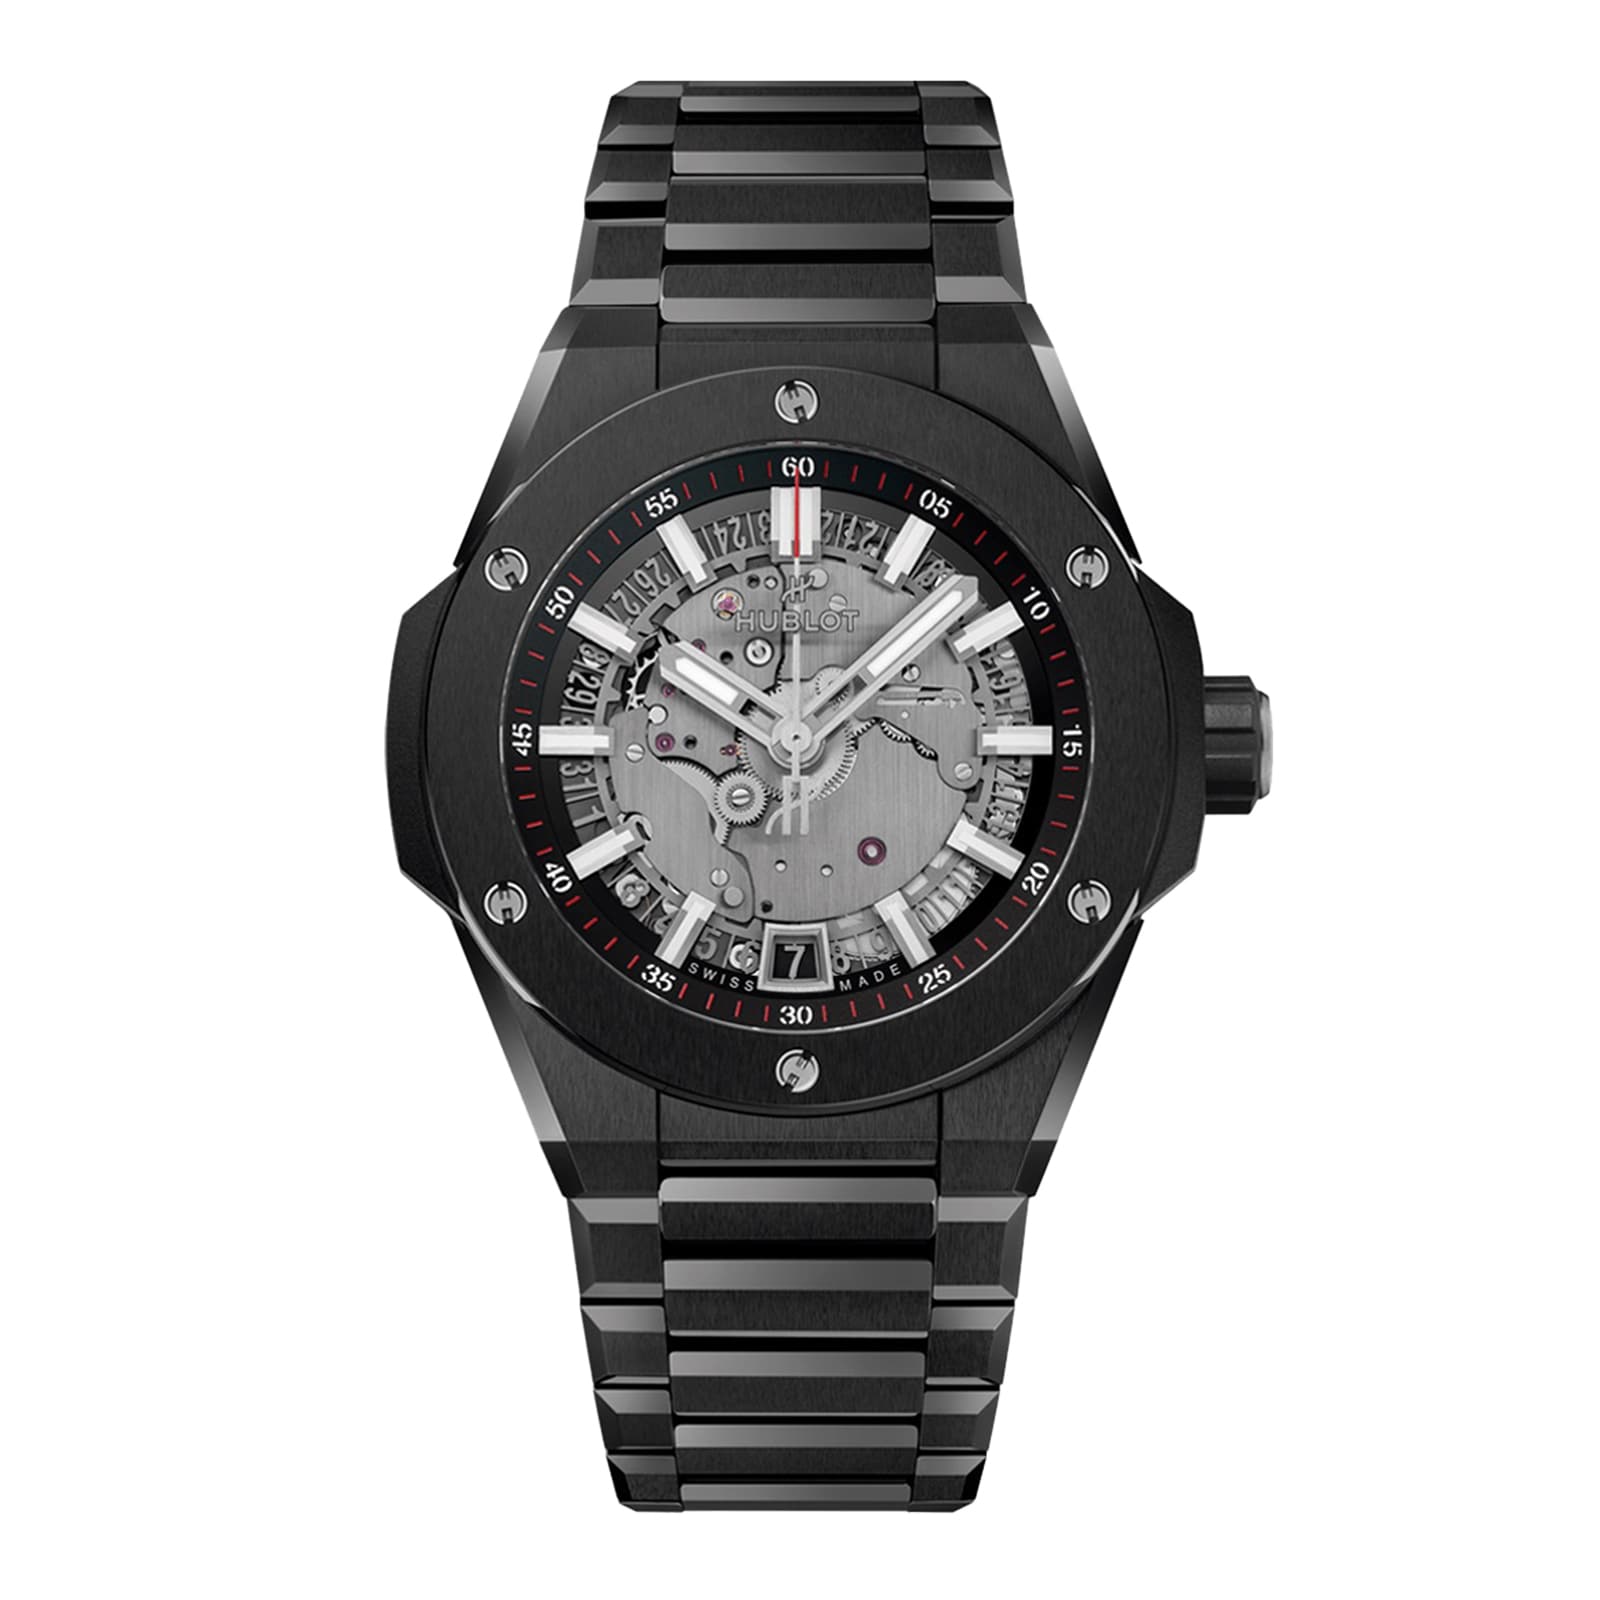 Hublot Classic Fusion Black Magic for Rs.584,302 for sale from a Trusted  Seller on Chrono24